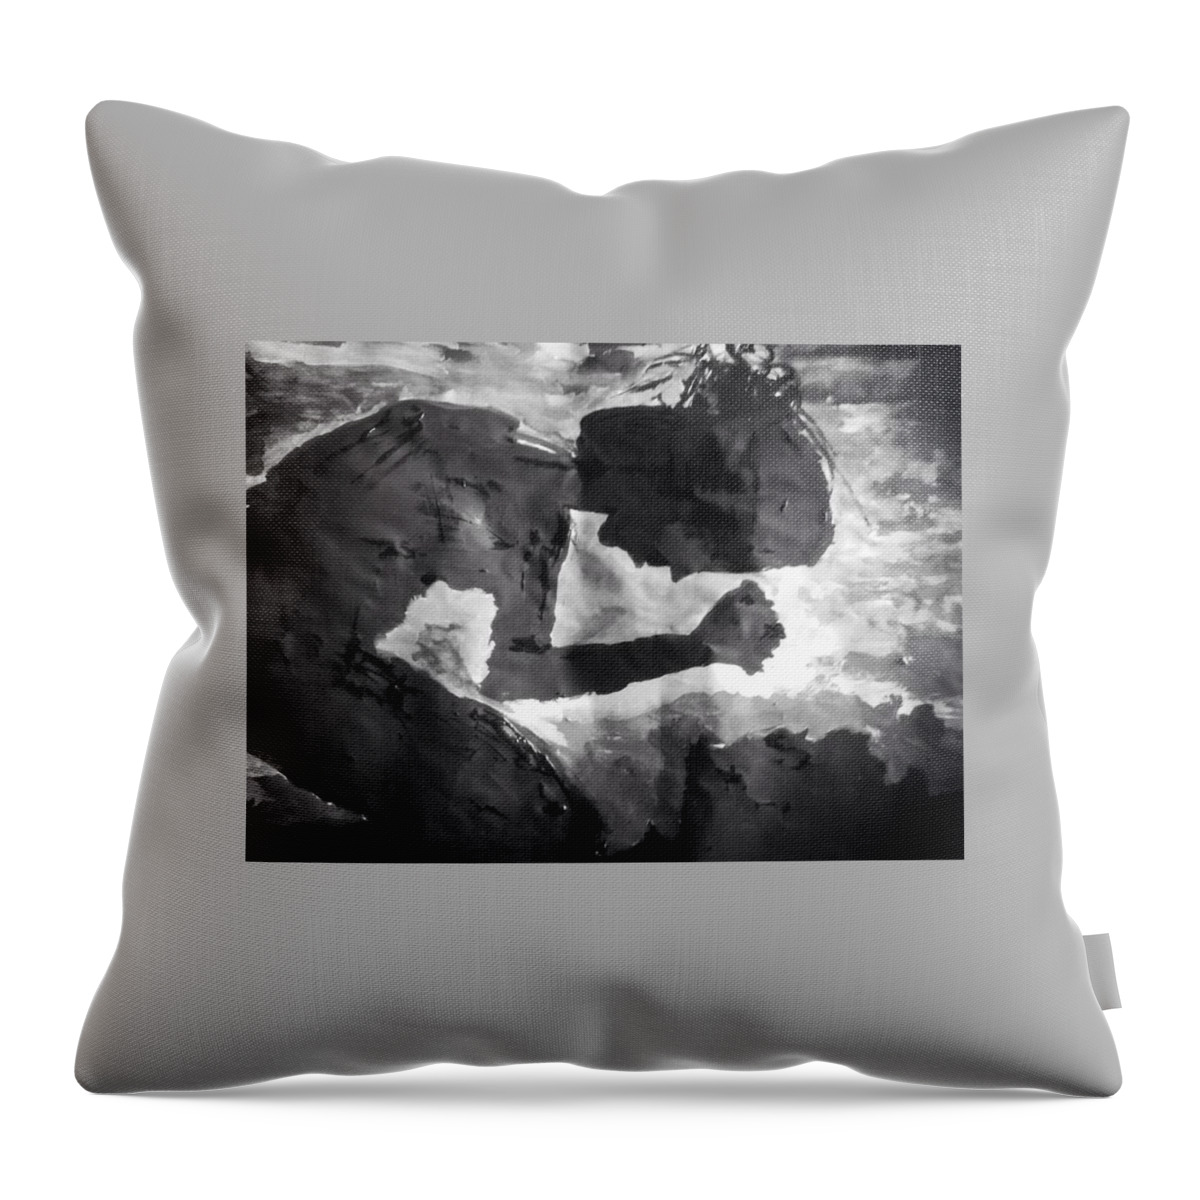 Prayer Throw Pillow featuring the photograph Praying Hands by Love Art Wonders By God